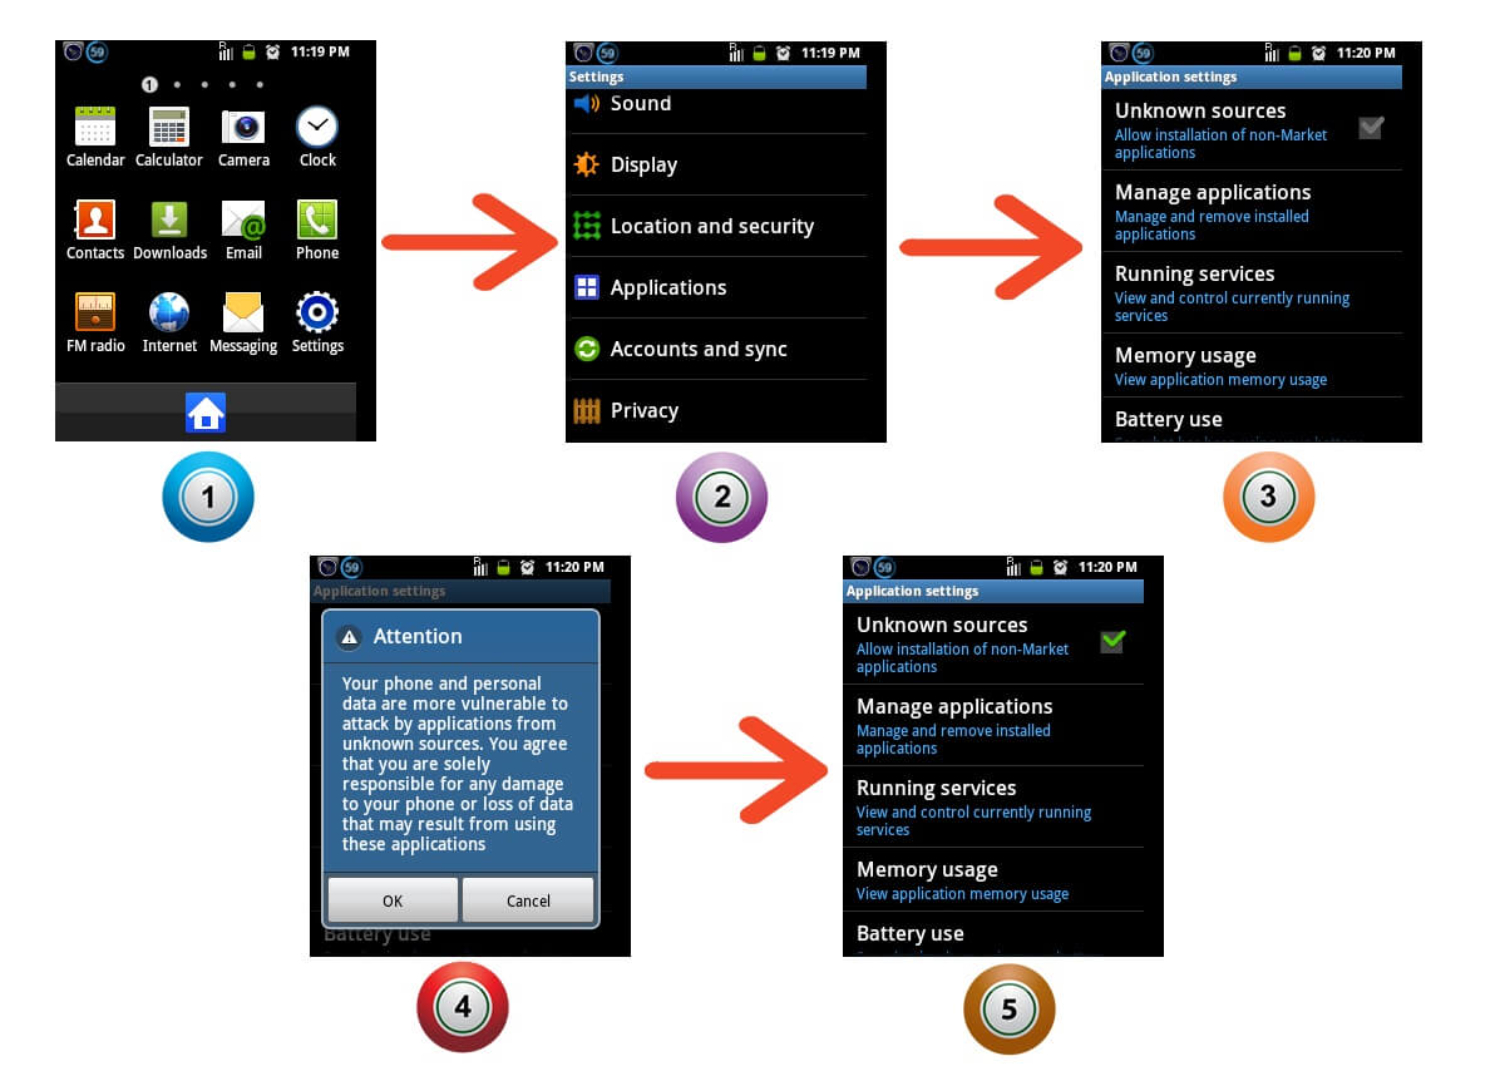 enable-third-party-apps-installation-on-android-phones